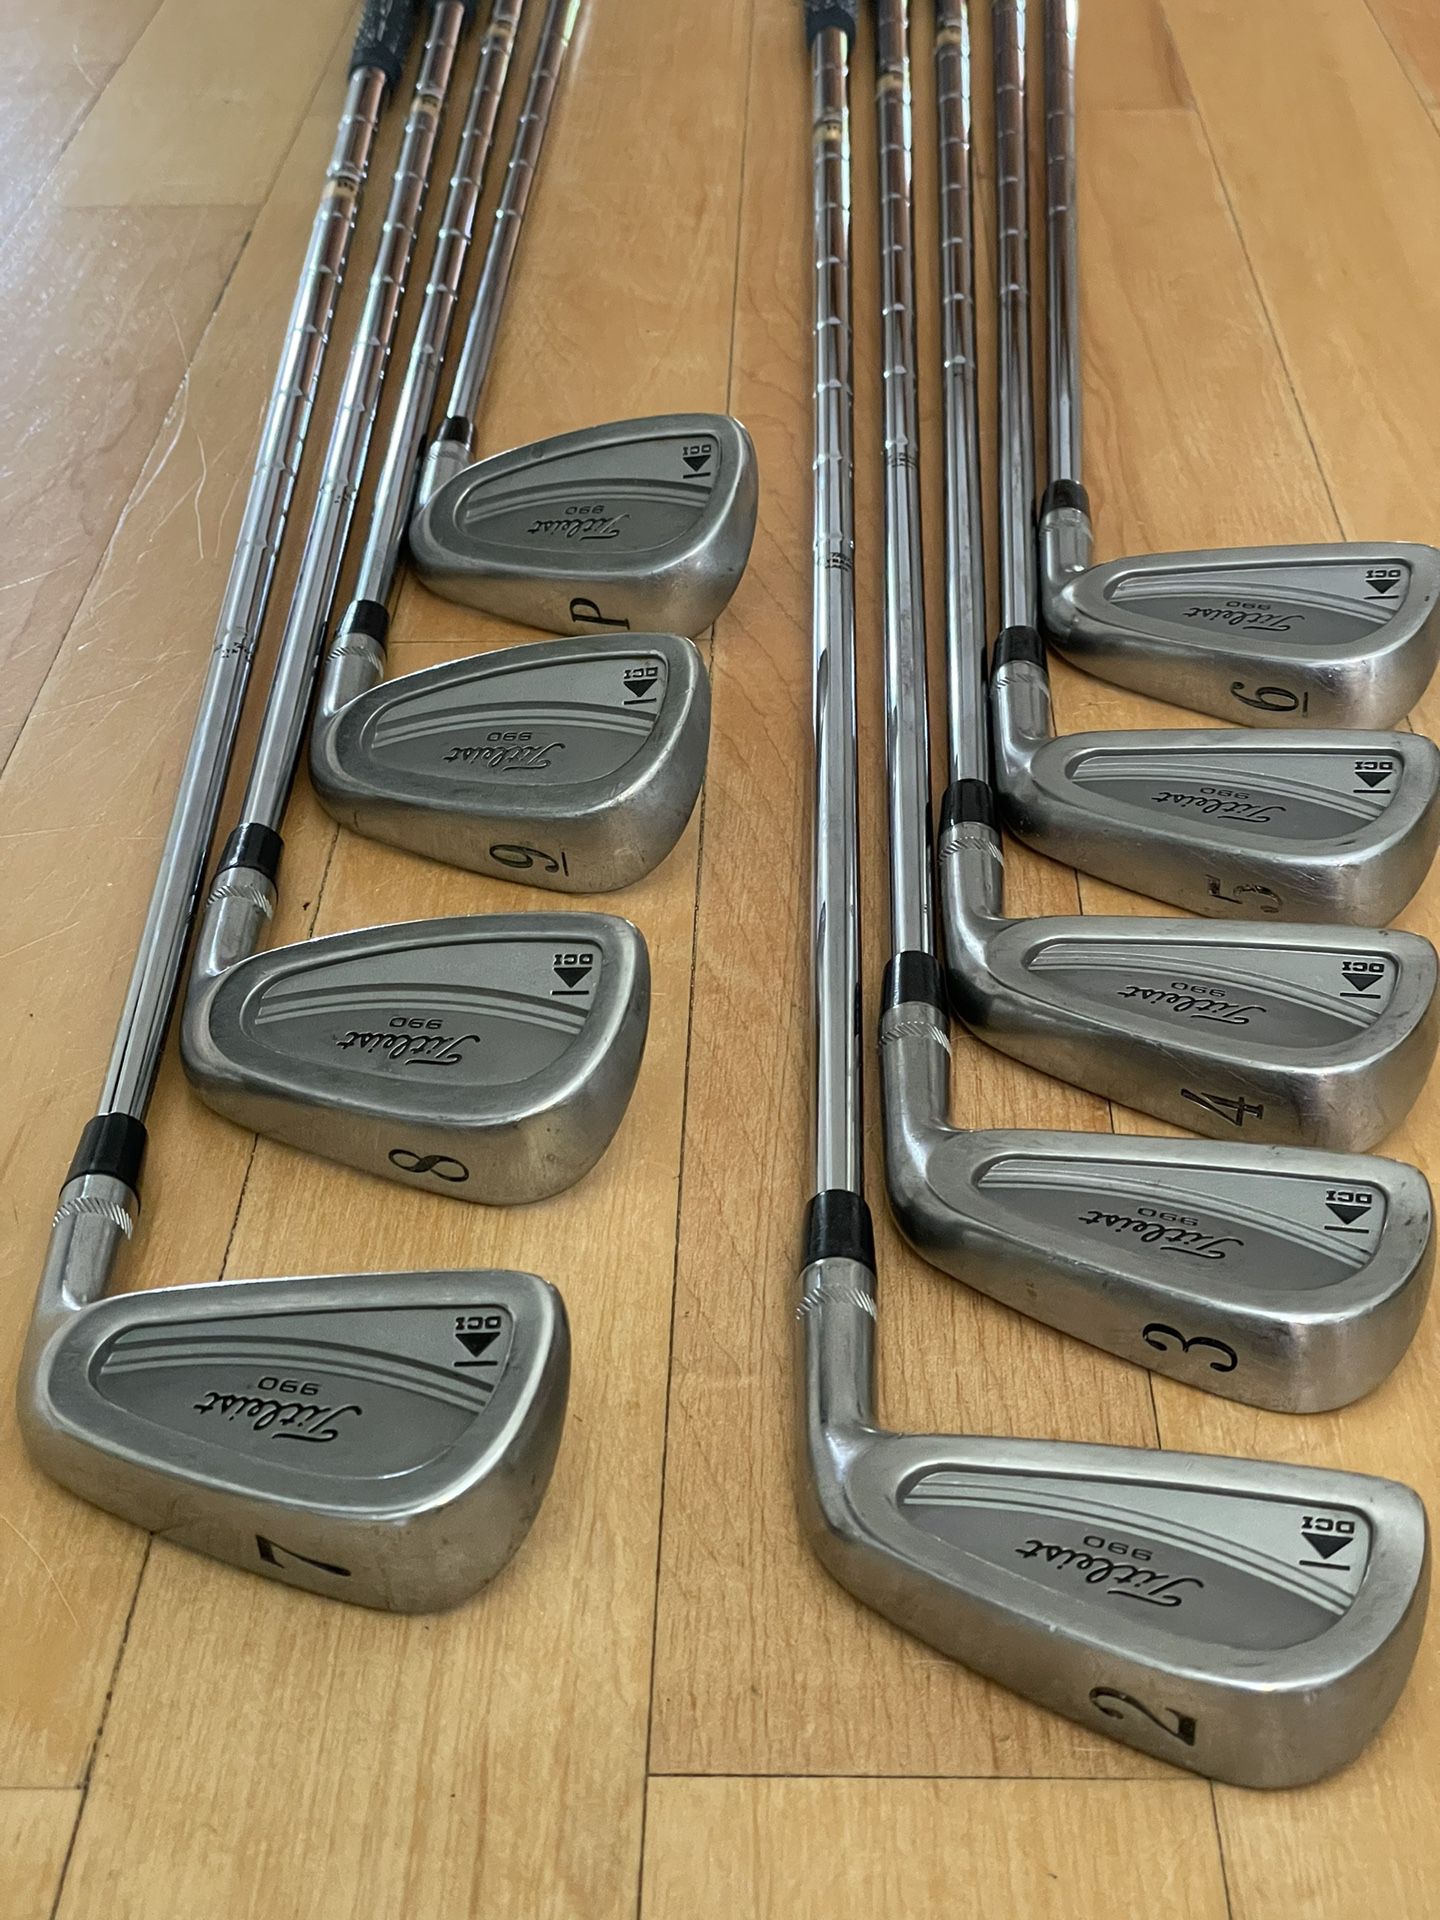 TITLEIST 990 DCI IRONS 2-PW